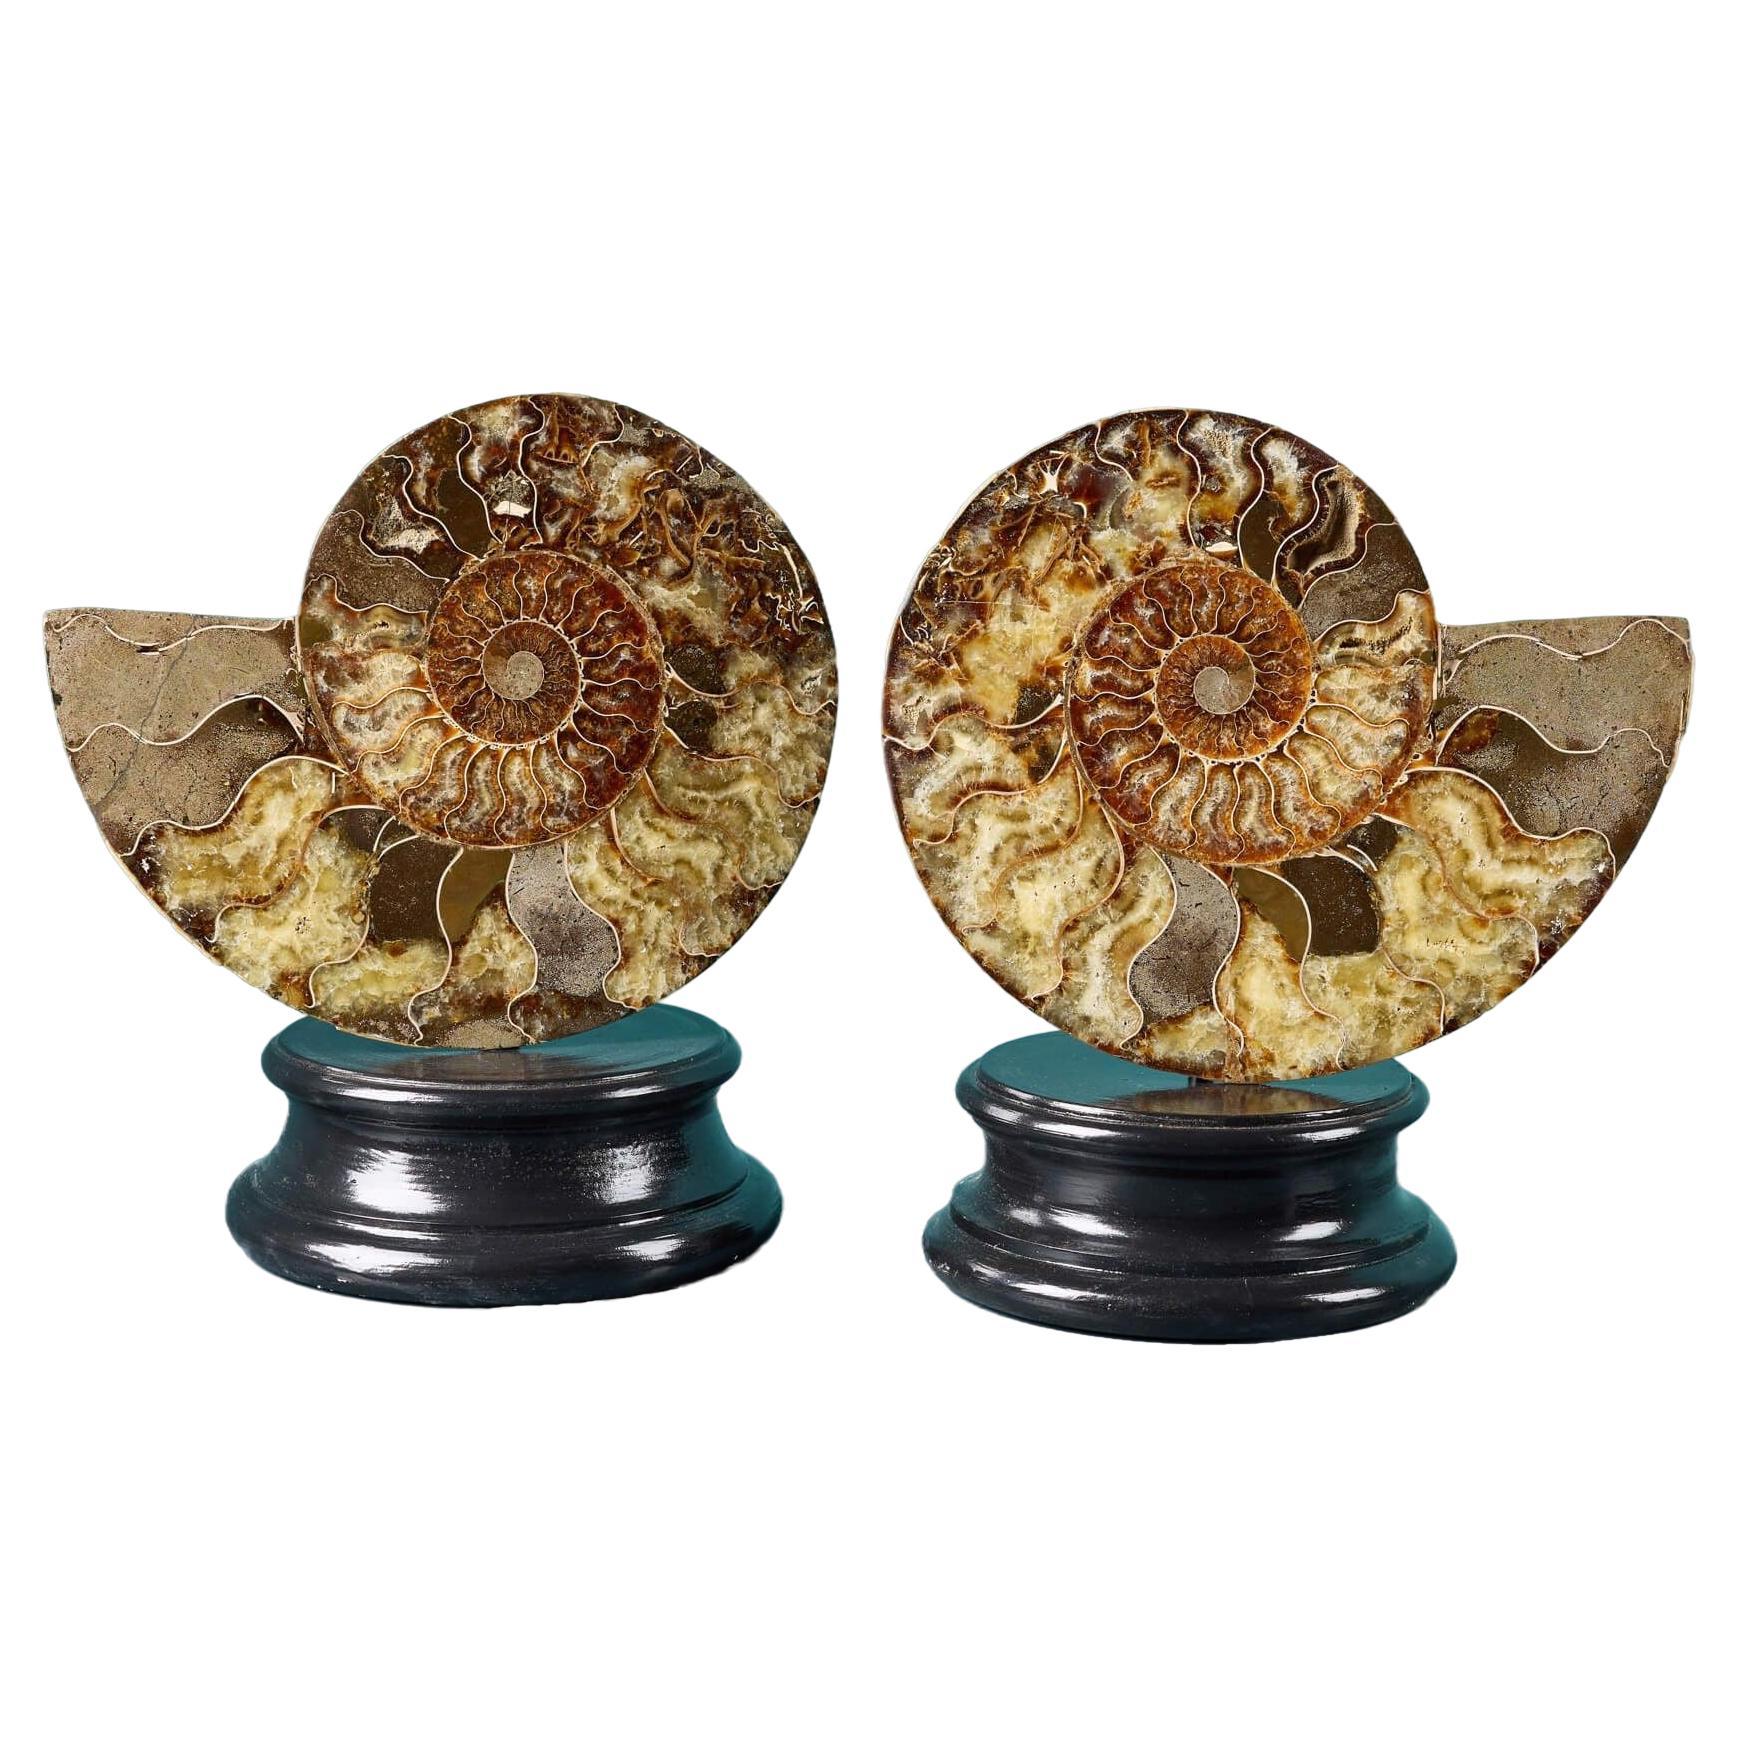 Pair of Polished Cut Ammonites with Crystalline Chambers For Sale